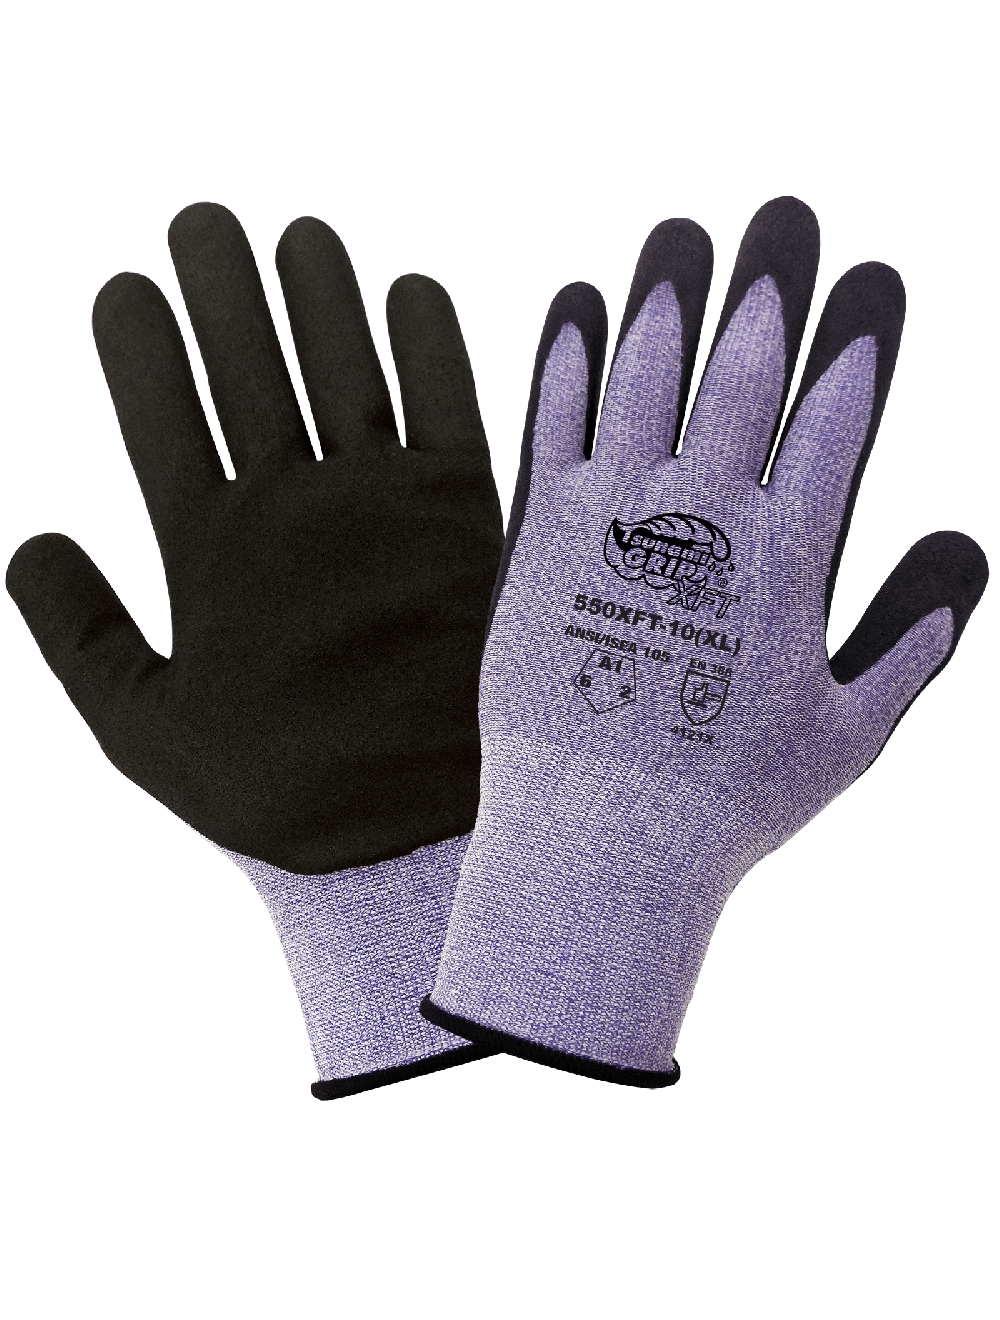 Which High-Temp Gloves Can Really Take the Heat? - Fluorogistx